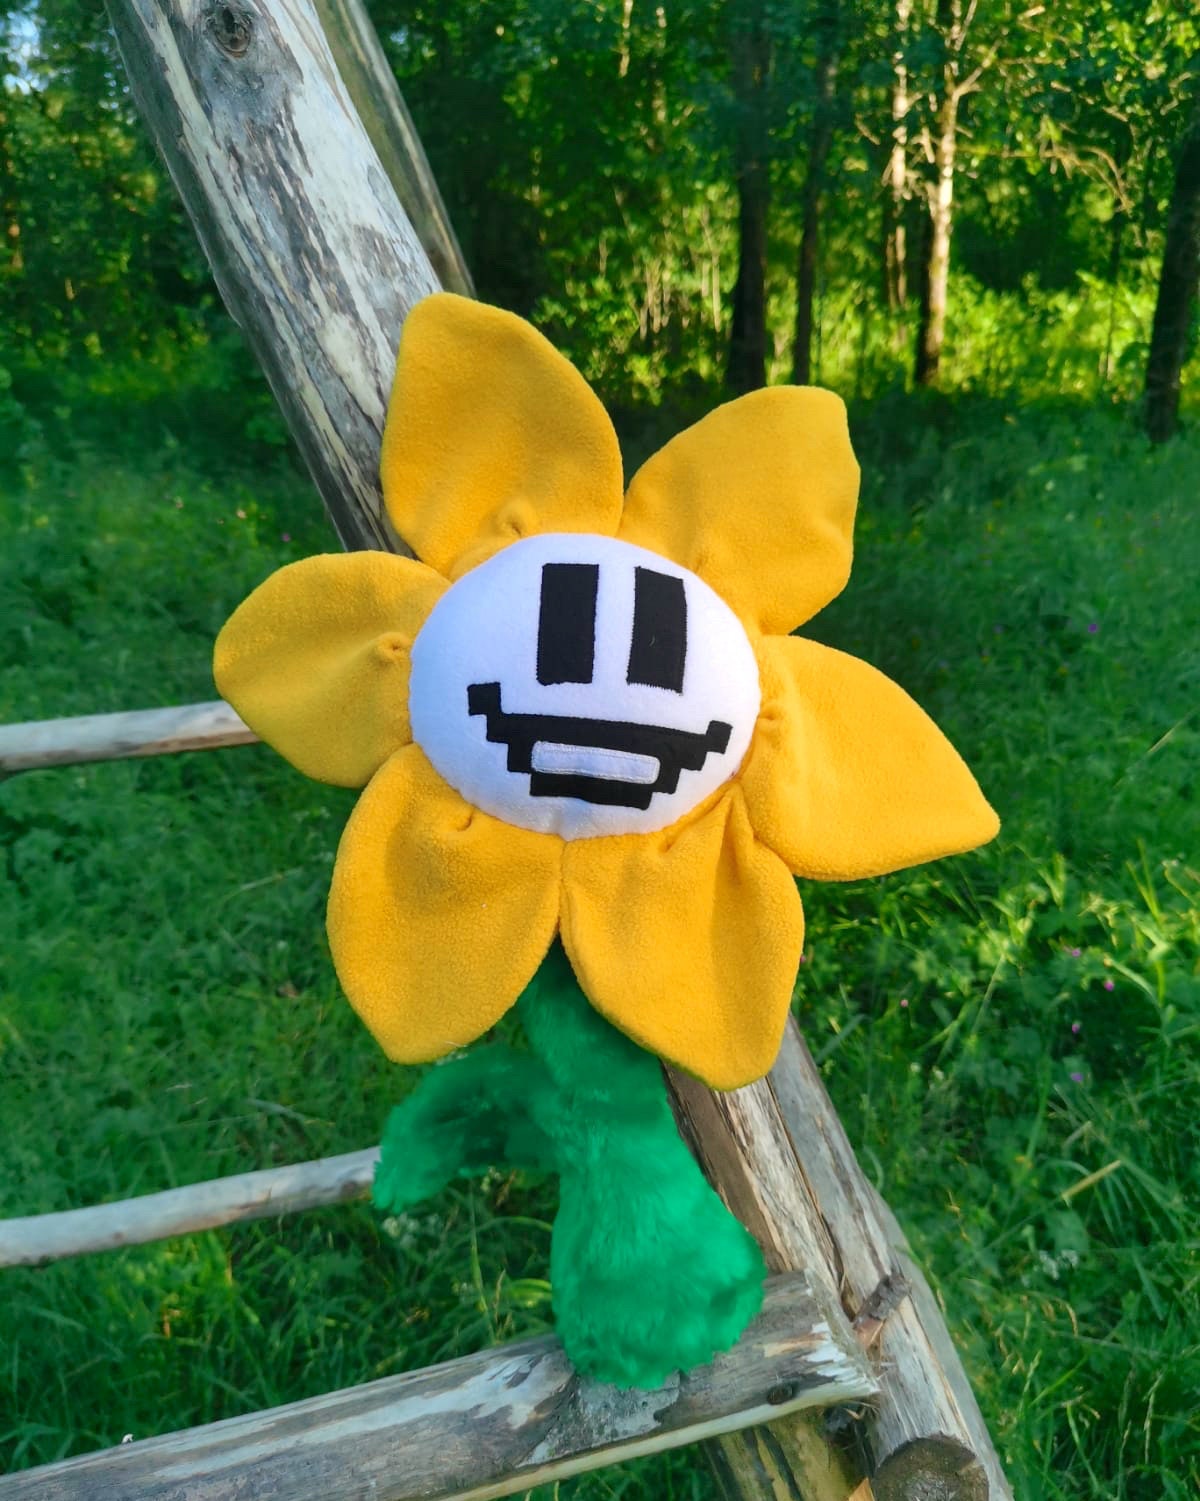 DIY GIANT Undertale Flowey Plushie with Interchangeable Face